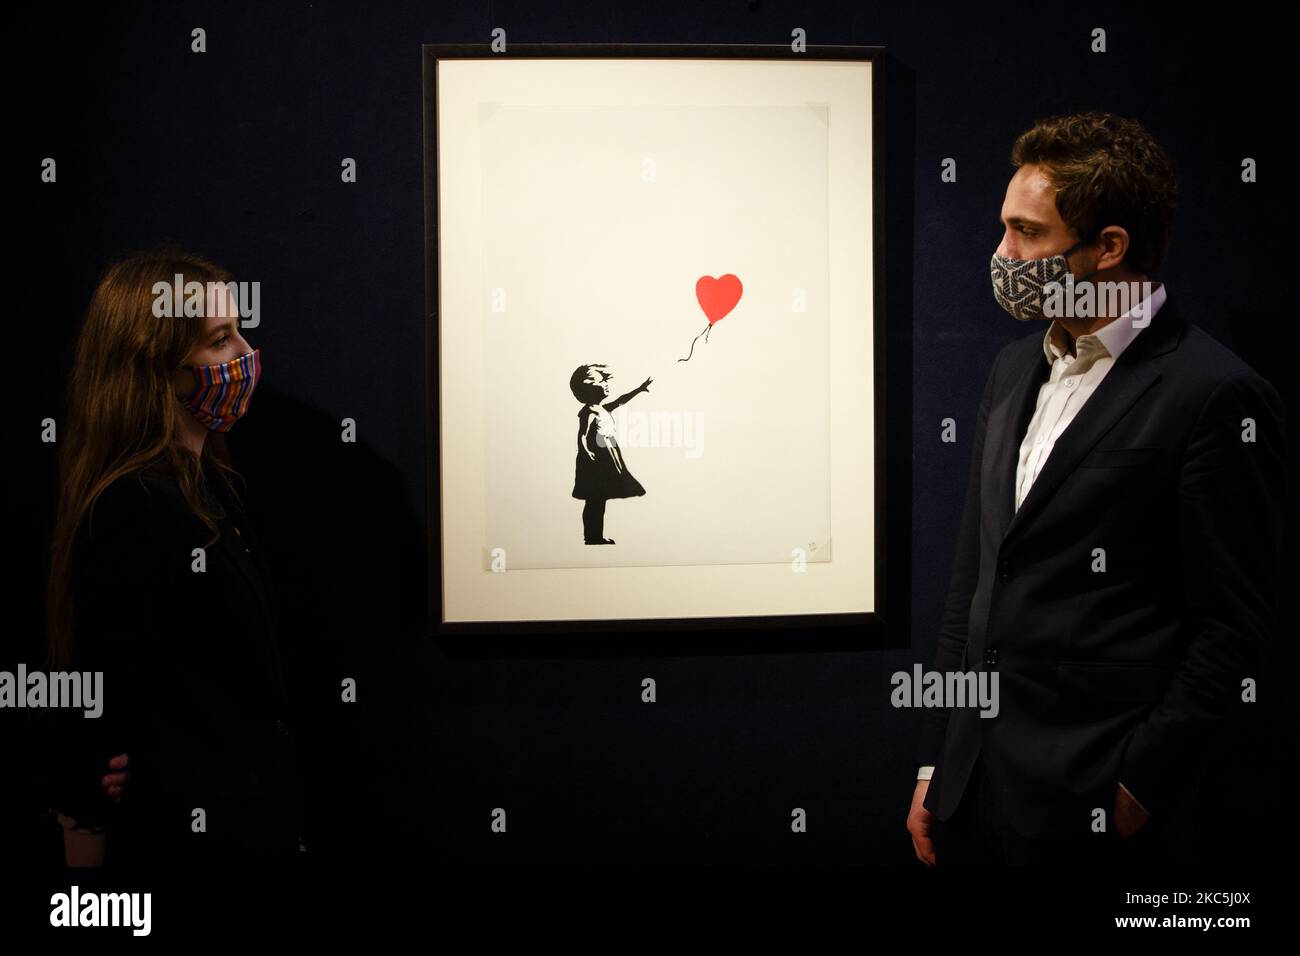 Members of staff wearing face masks pose with 'Girl with Balloon', by British artist Banksy, estimated at 120,000-180,000GBP, during a photo call for the upcoming Prints and Multiples sale at Bonhams auction house in London, England, on December 10, 2020. The sale takes place next Tuesday, December 15. (Photo by David Cliff/NurPhoto) Stock Photo